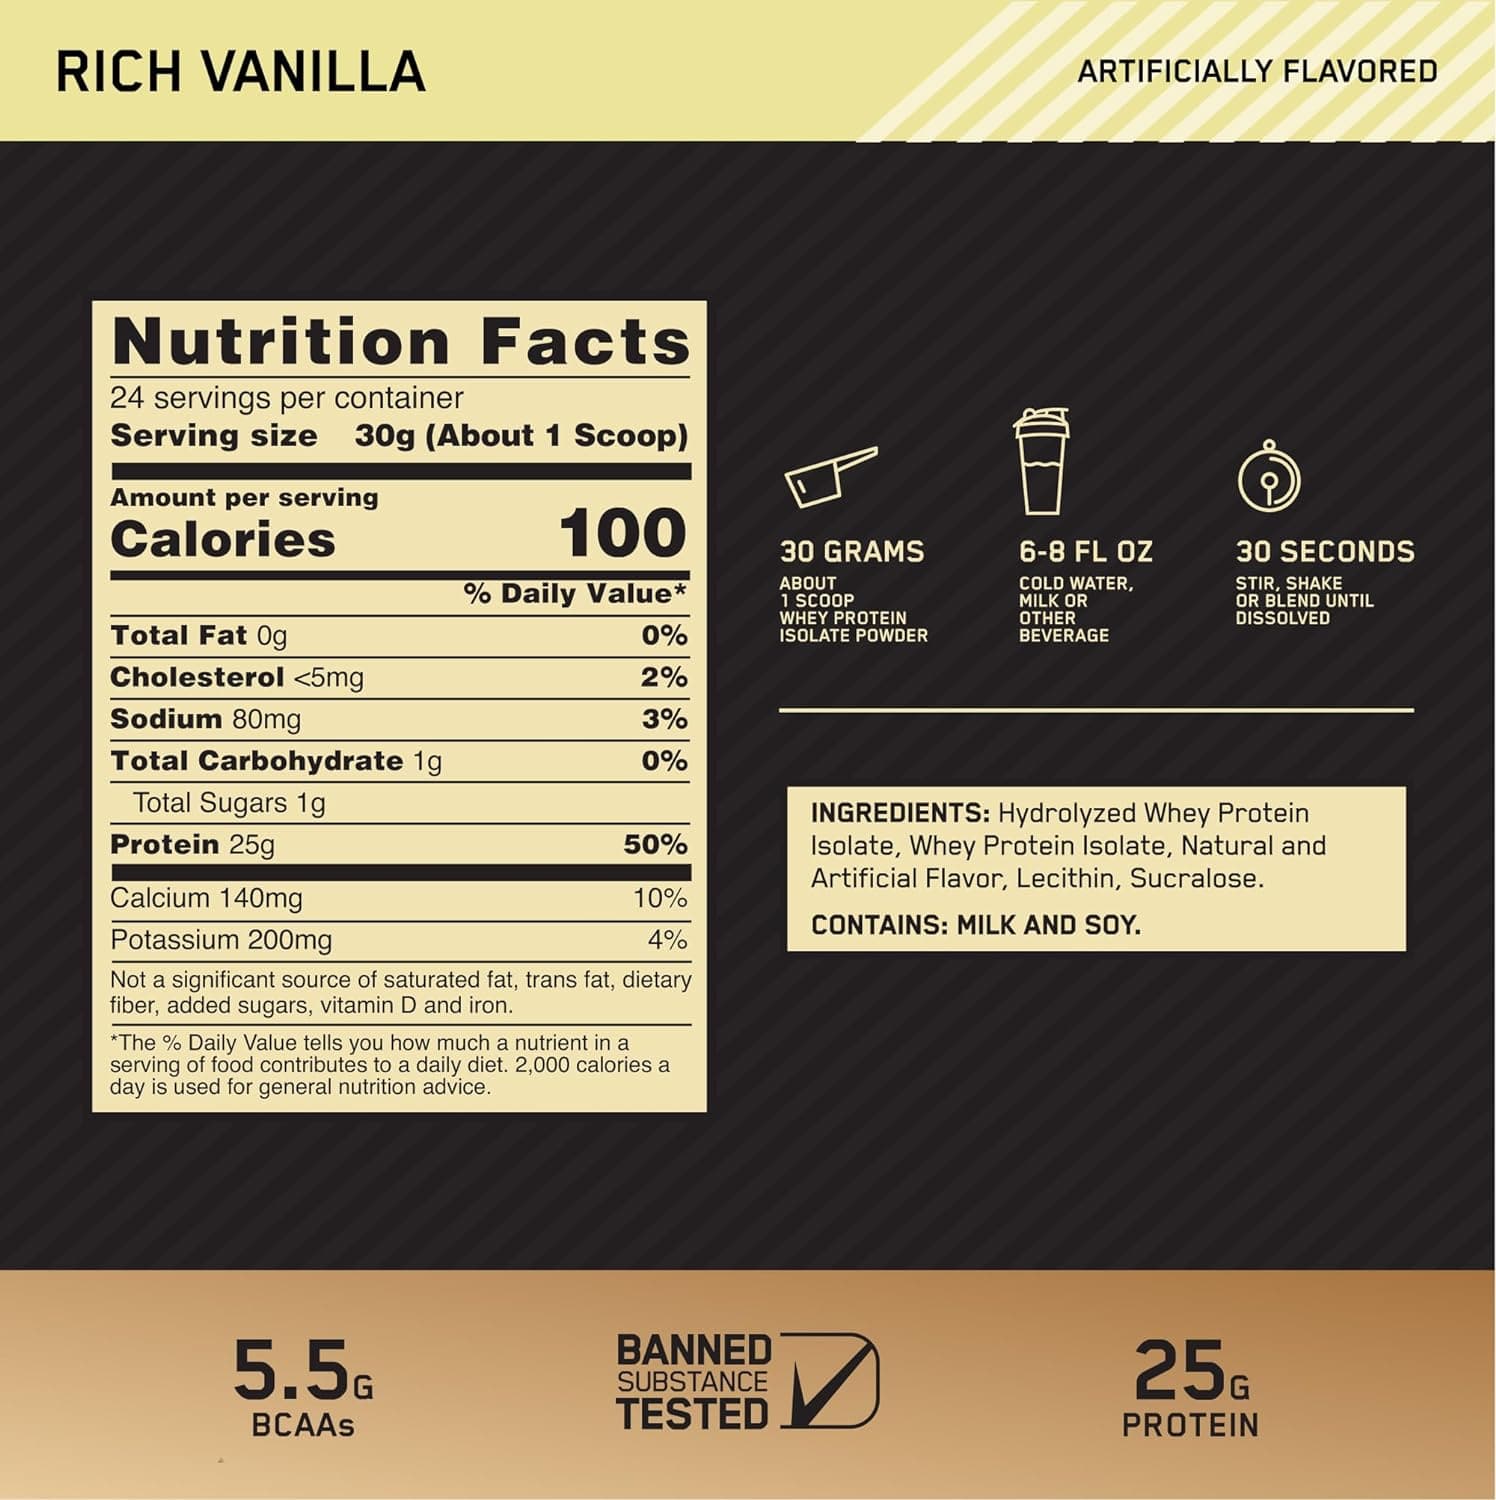 Optimum Nutrition Gold Standard 100% Isolate Hydrolyzed and Ultra-Filtered Whey Protein Isolate for , Rich Vanilla, 1.58 lbs - 24 Servings - 720 Grams